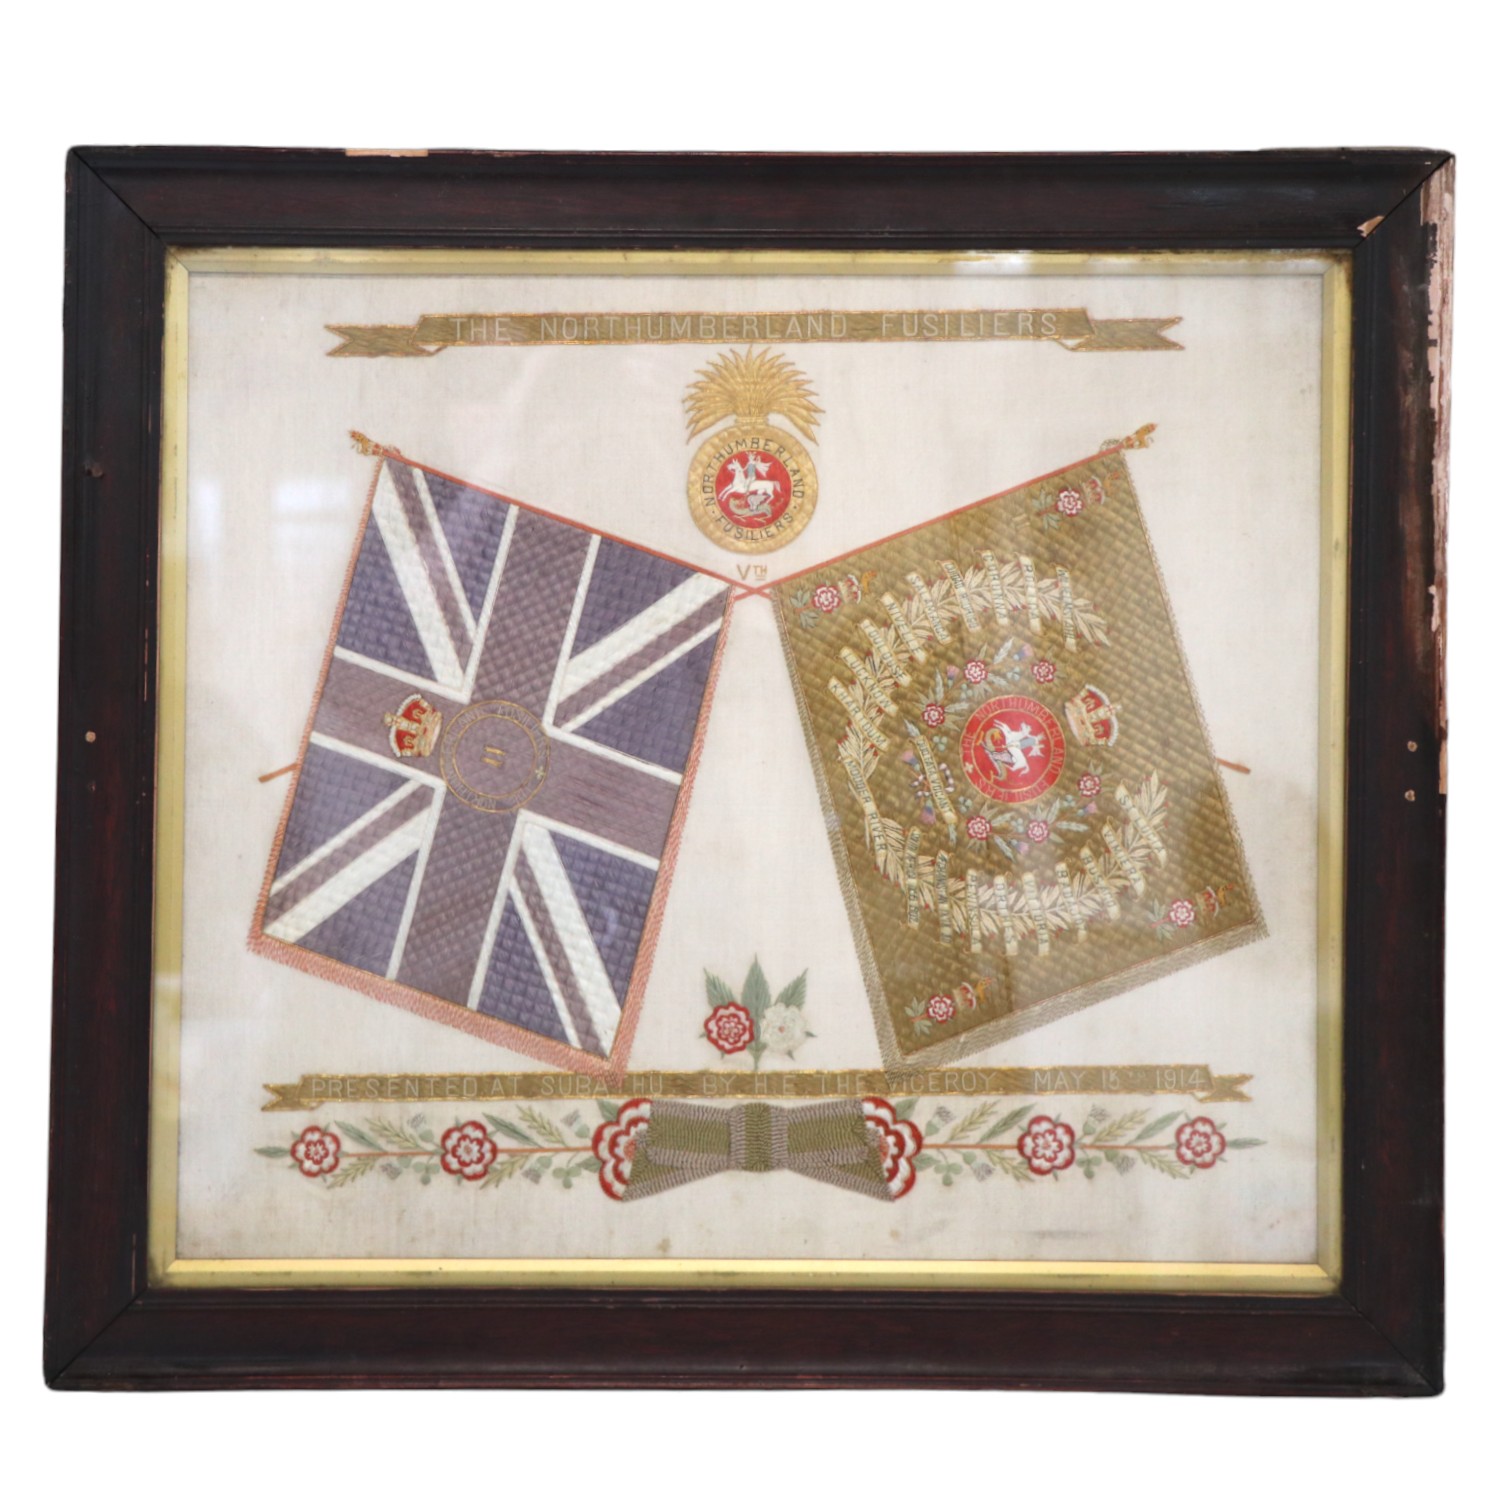 A Great War embroidered silk sampler commemorating the Northumberland Fusiliers, presented at - Image 2 of 3